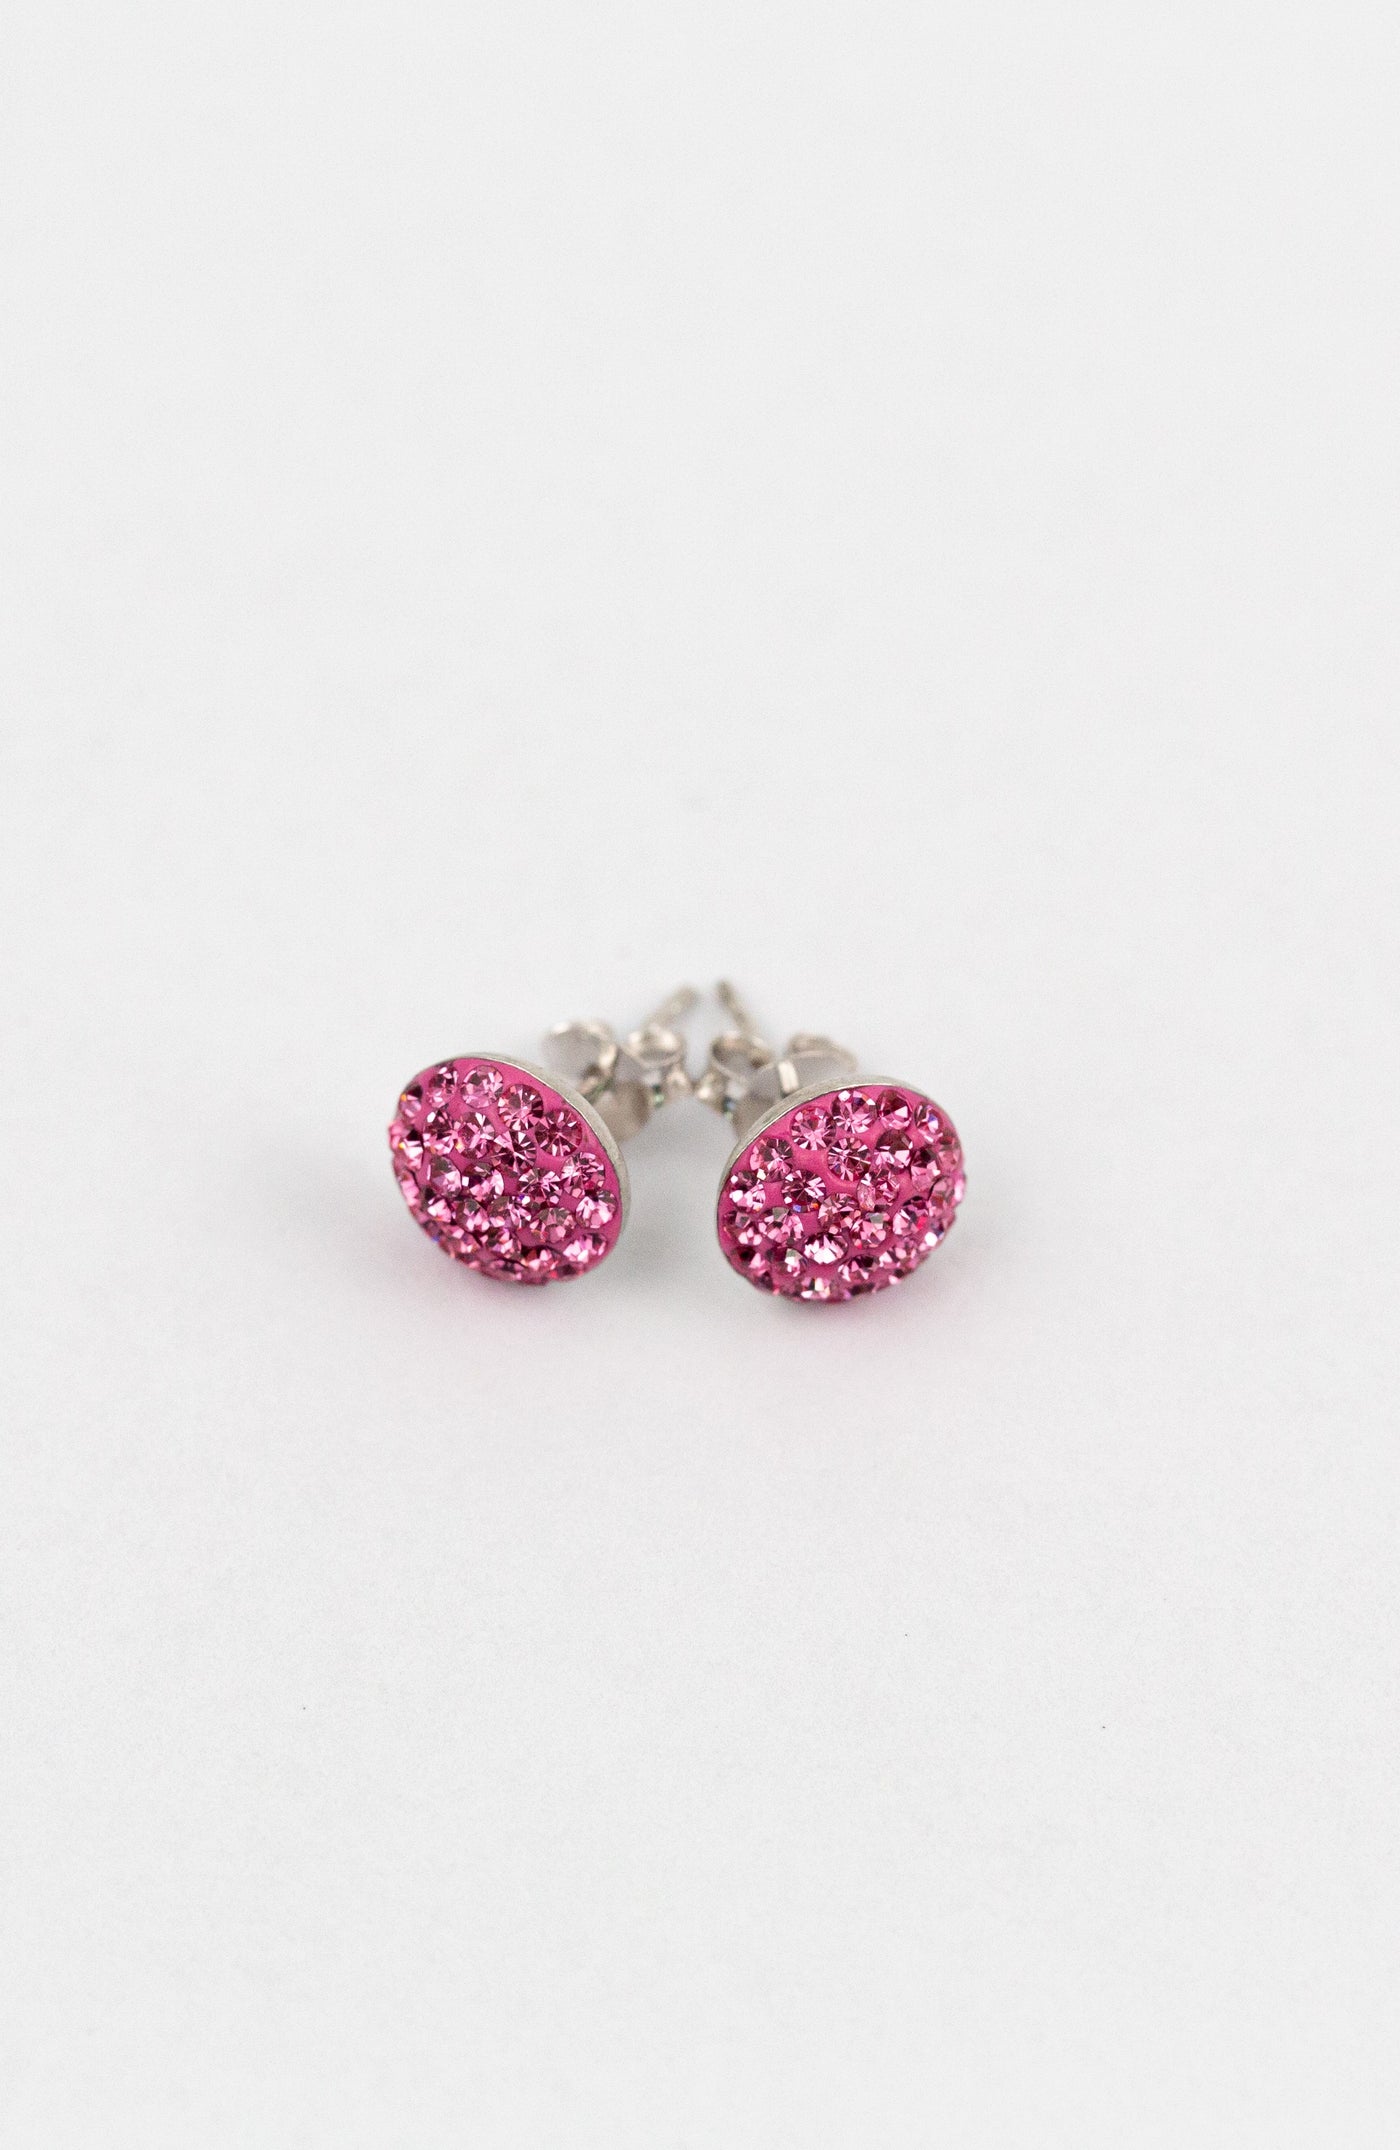 9mm Round Rose Pink Swarovski Crystal Sterling Silver Earrings | Annie and Sisters | sister stud earrings, for kids, children's jewelry, kid's jewelry, best friend